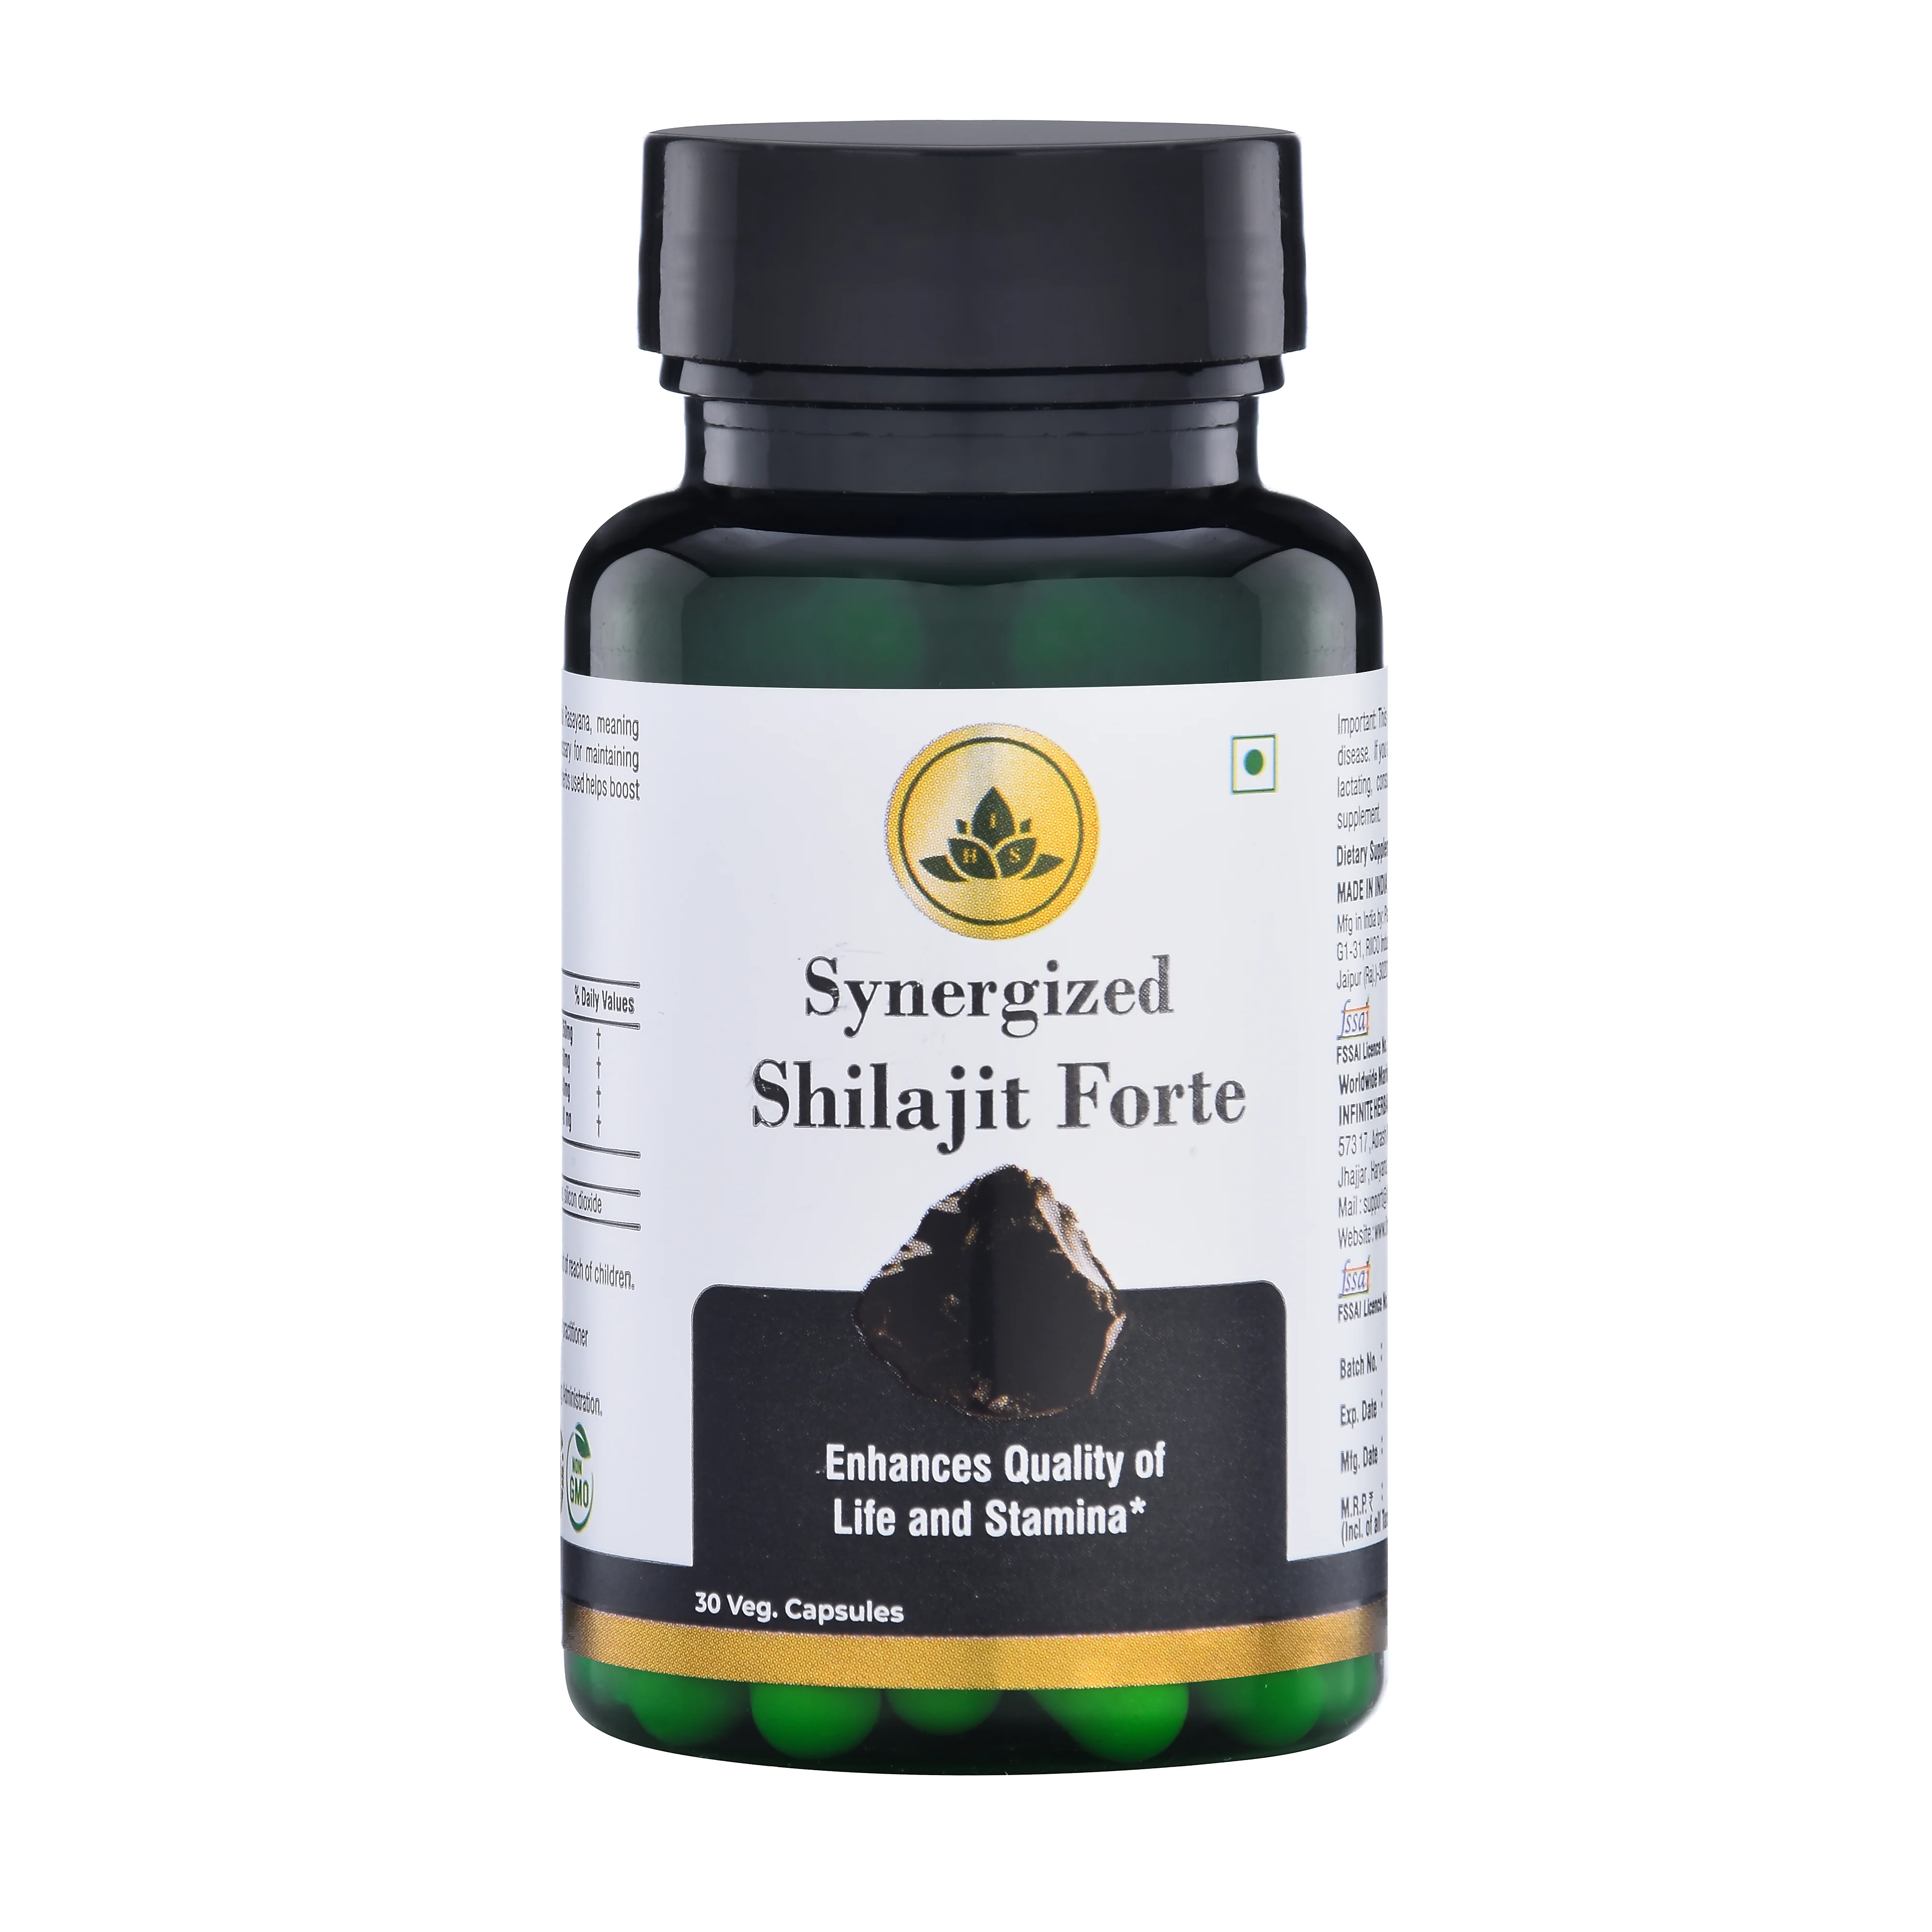 Synergized Shilajit Forte Anti Aging Herbs herbs increase the sperm count